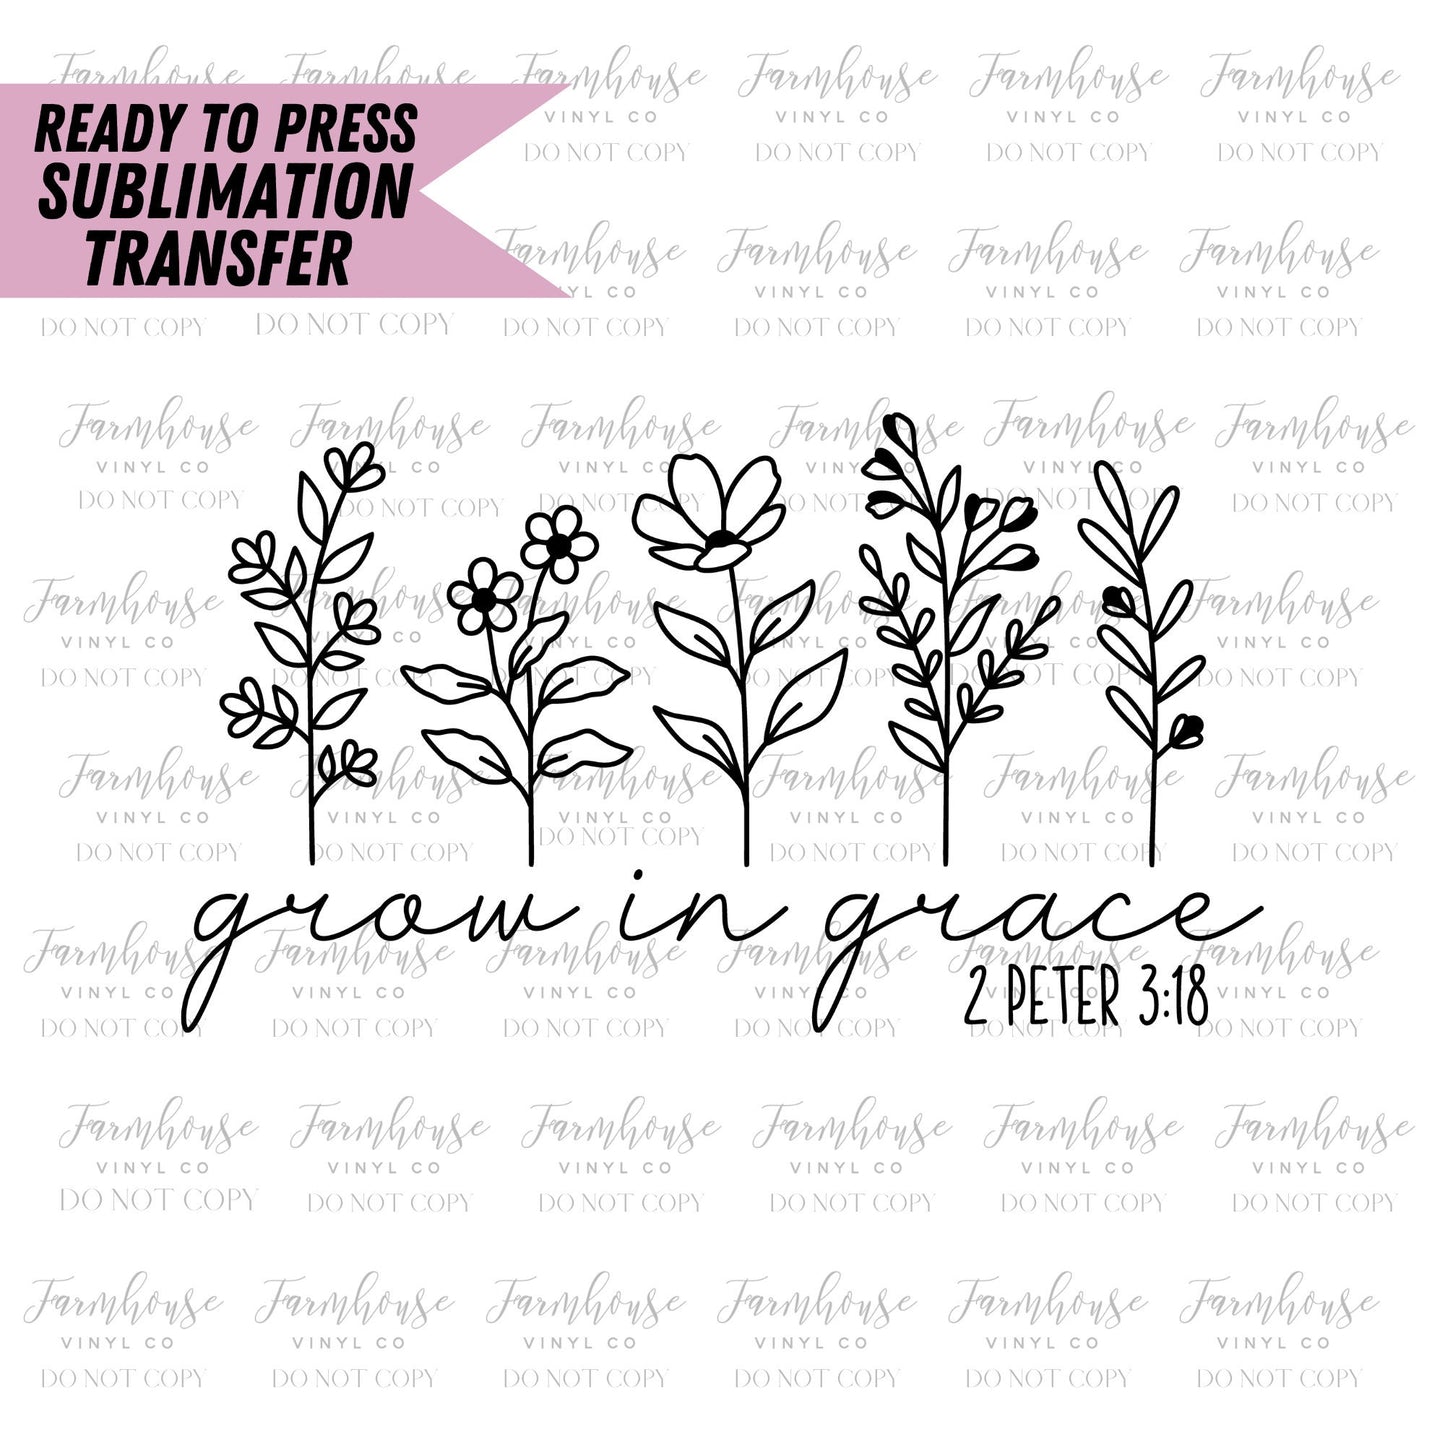 Grow in Grace, Ready to Press Sublimation Transfer, Sublimation Prints, Heat Transfer, Faith, Christian Biblical Quote, 2 Peter 3:18 - Farmhouse Vinyl Co